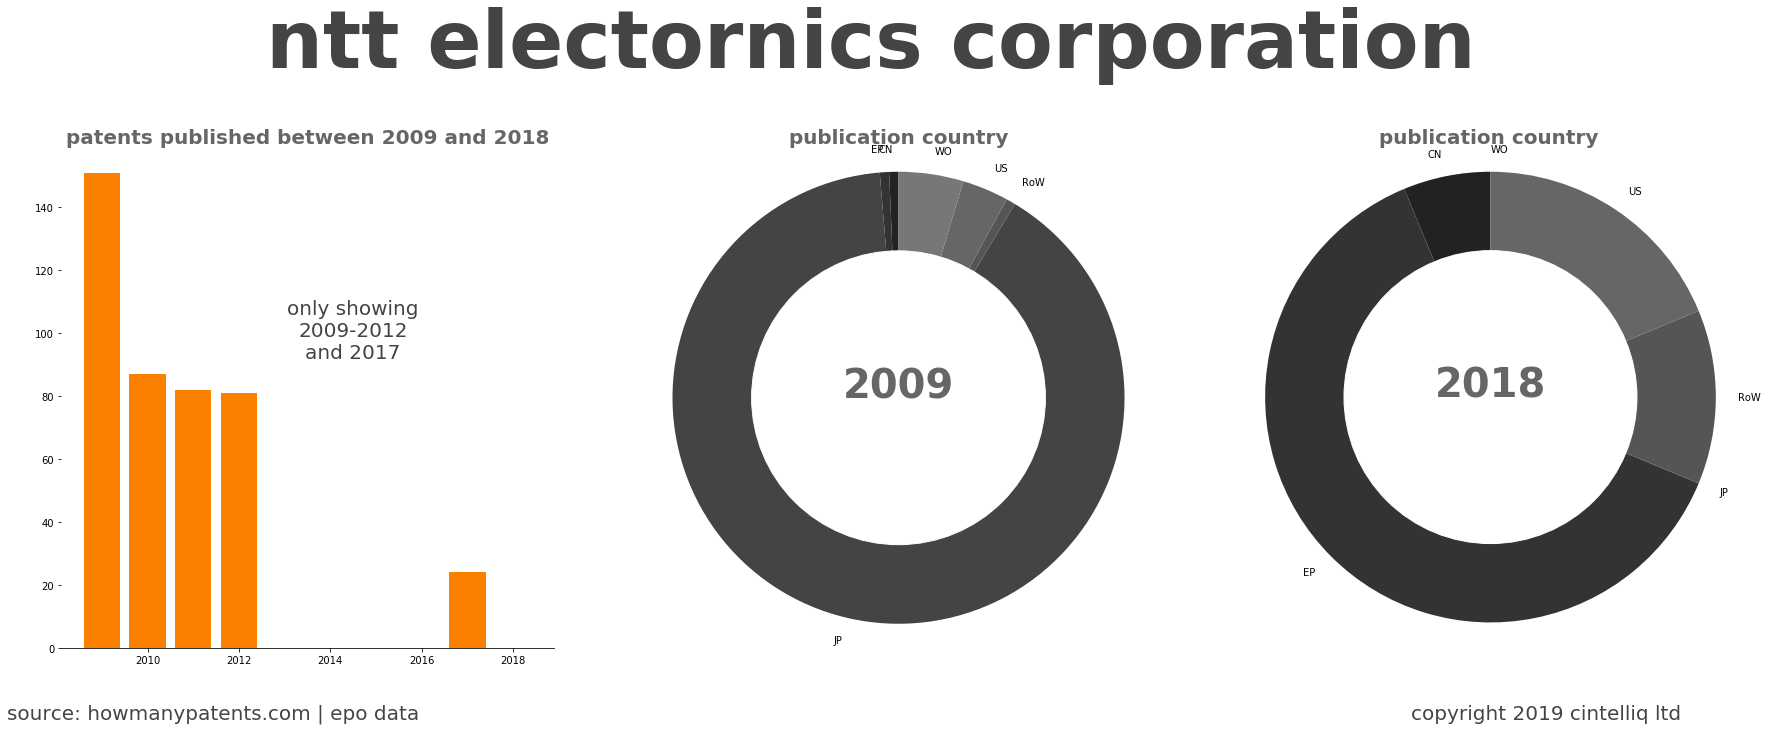 summary of patents for Ntt Electornics Corporation